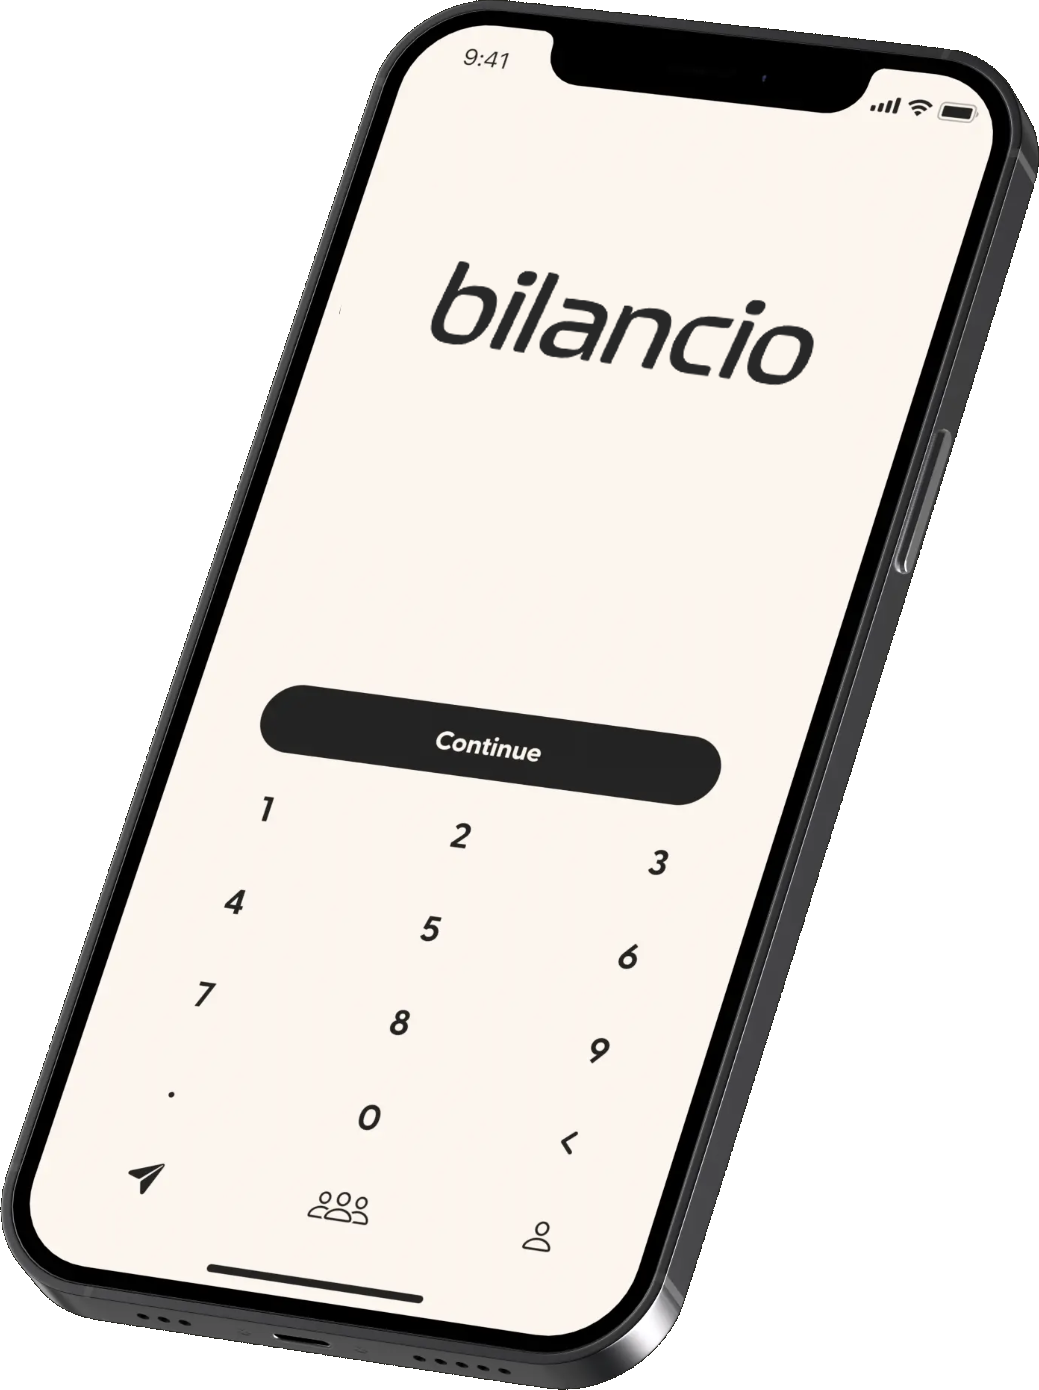 The Bilancio inspections app shares, stores and organises photos and associated data on the main database wherever you are. 